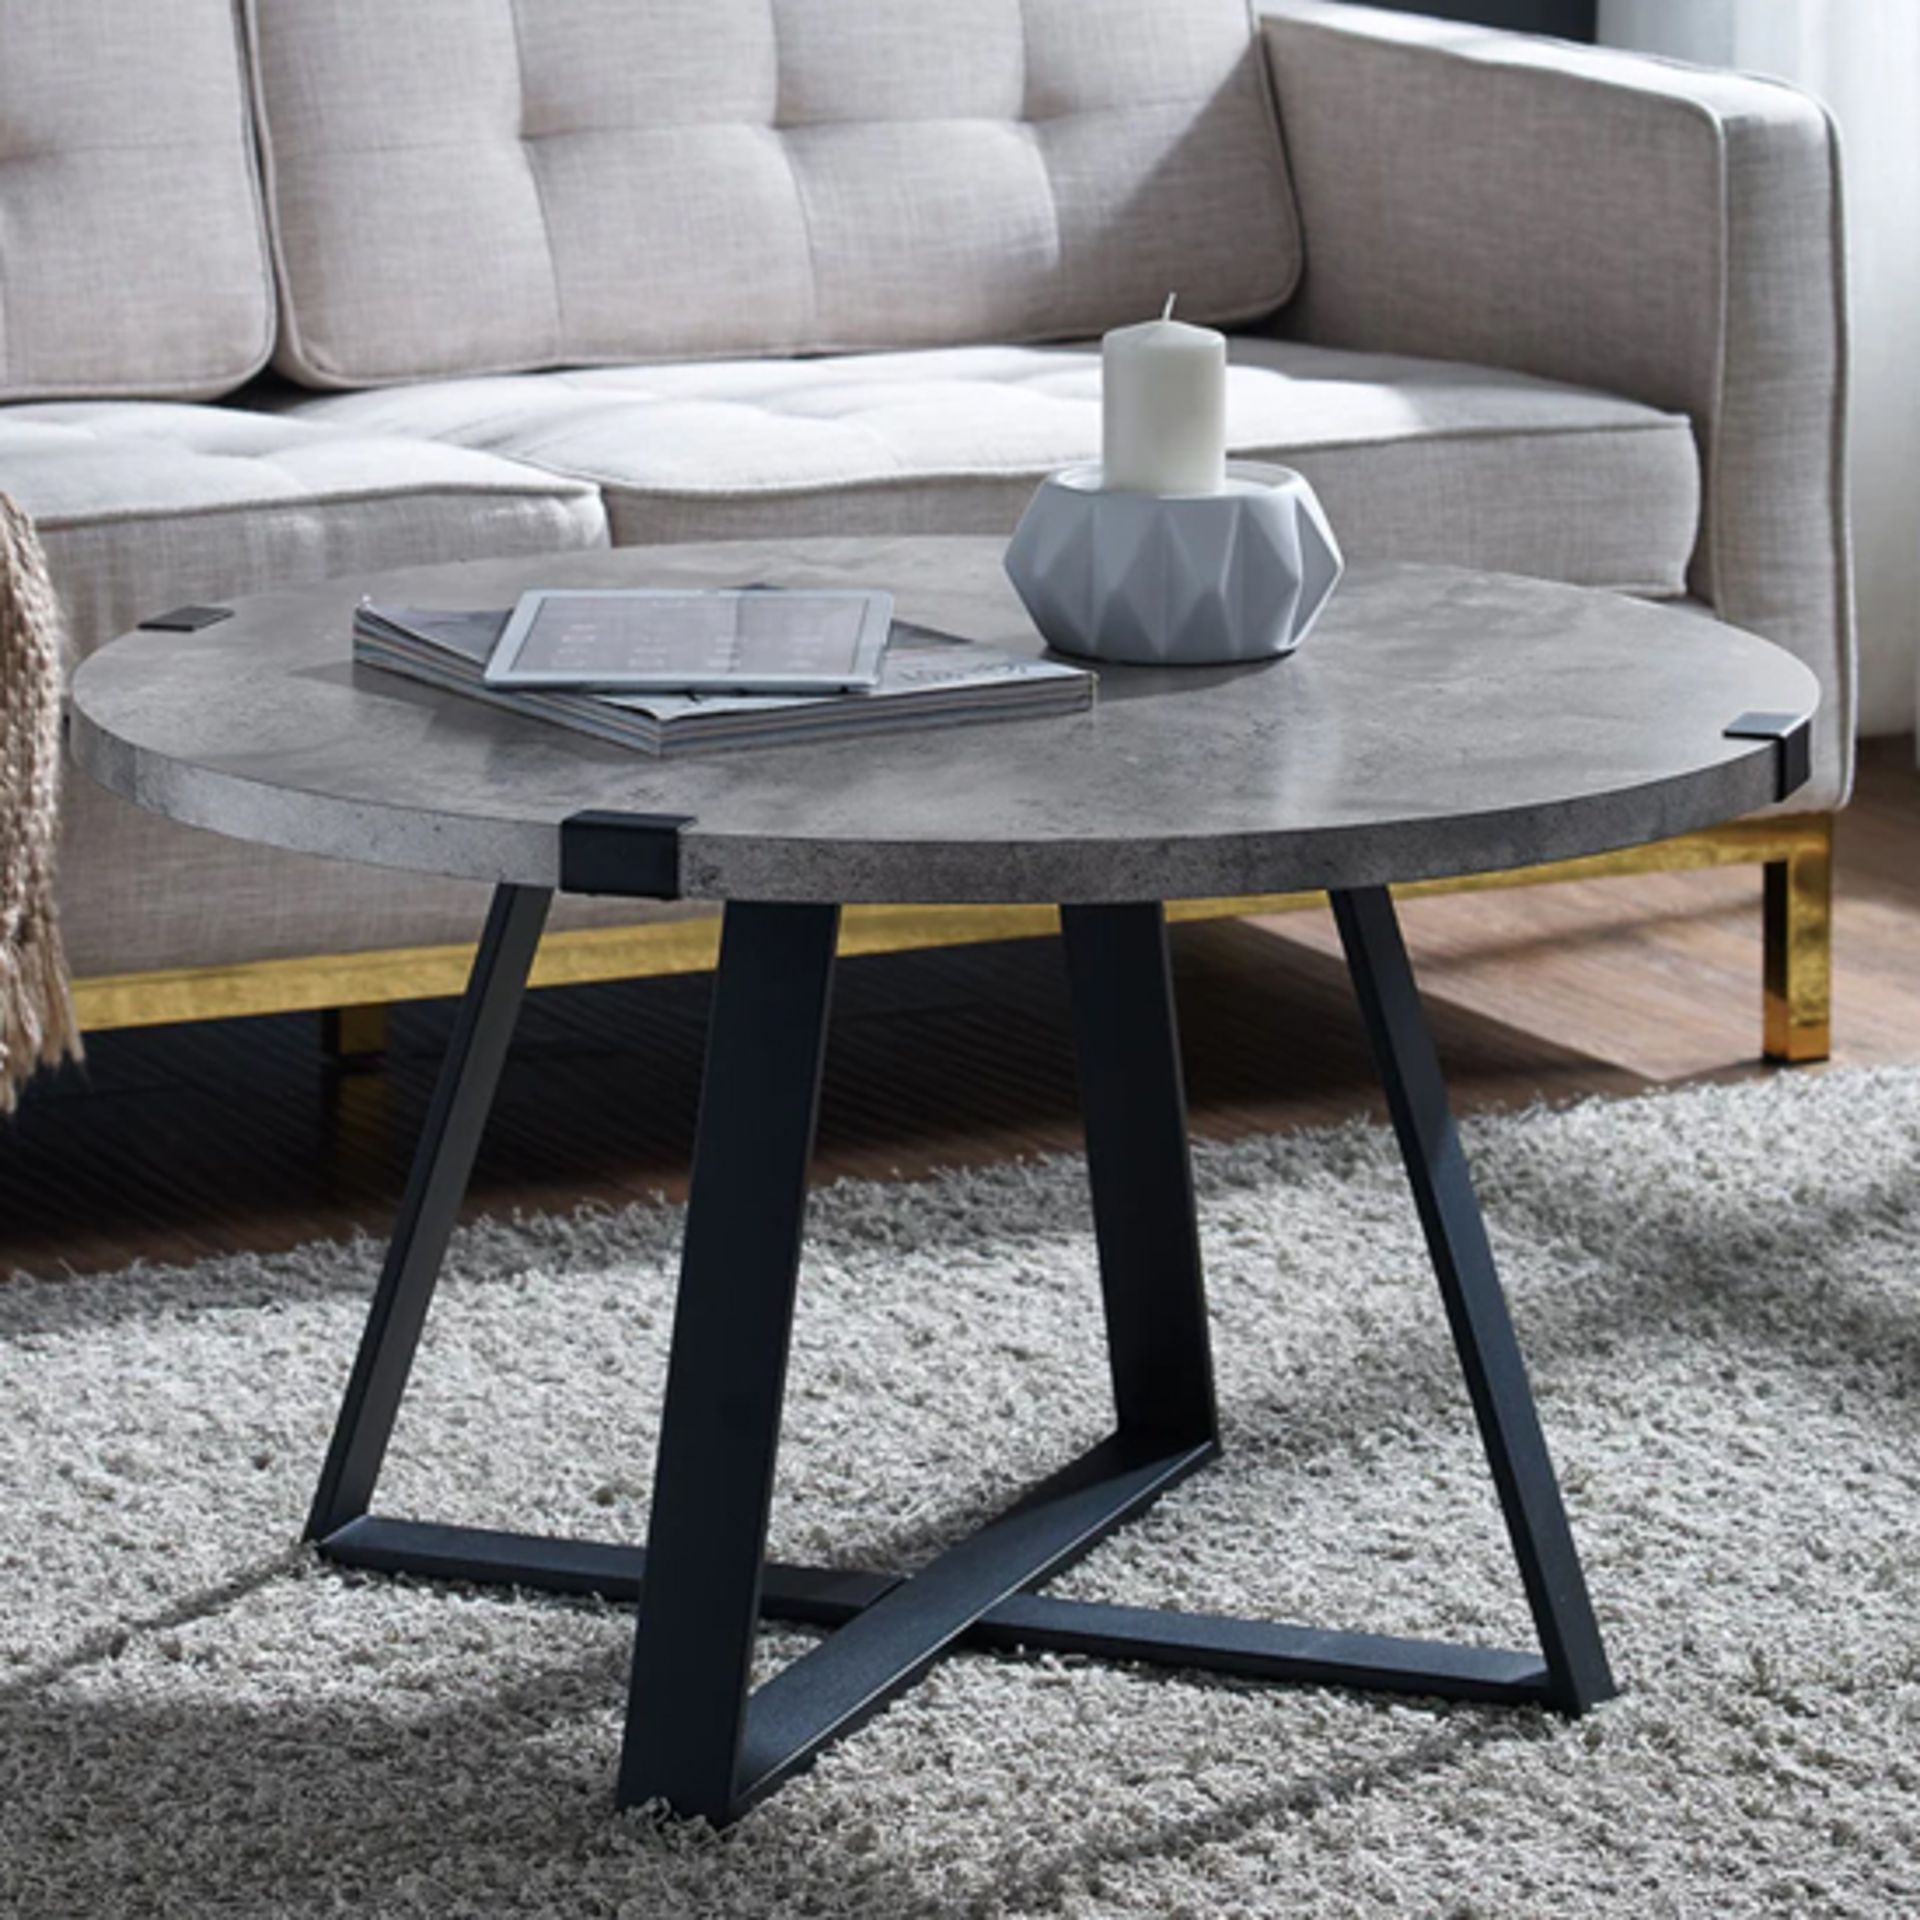 IRVINE DARK CONCRETE EFFECT COFFEE TABLE WITH BLACK FRAME (GREY) - RRP £245 - Image 2 of 2